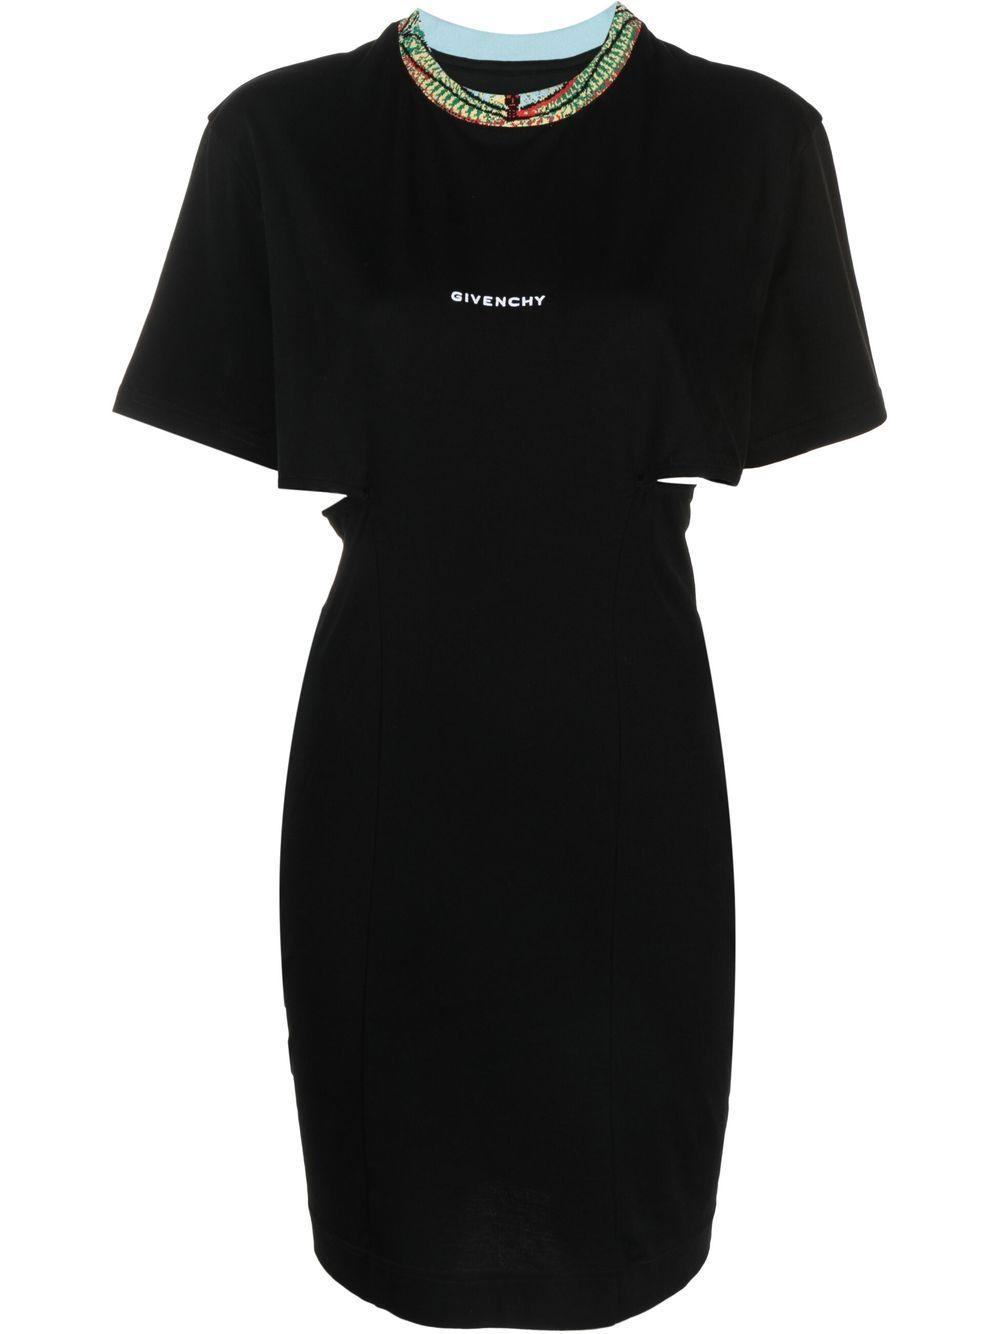 Givenchy Embroidered-logo T-shirt Dress in Black | Lyst